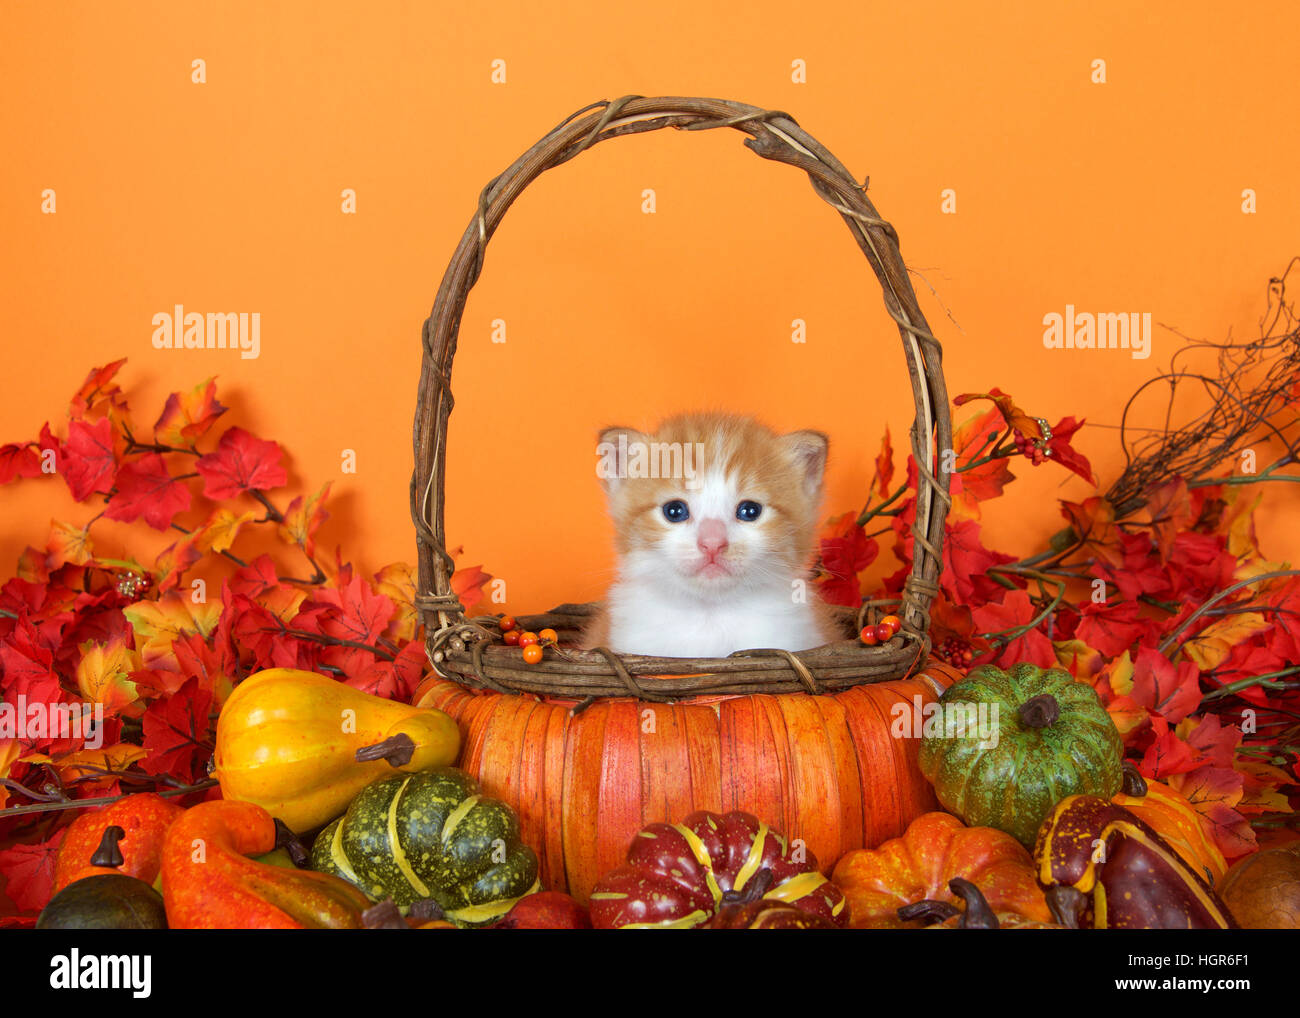 small orange and white tabby kitten sitting in a pumpkin basket surrounded by autumn leaves, gourds and squash. Fun festive scene to celebrate autumn Stock Photo